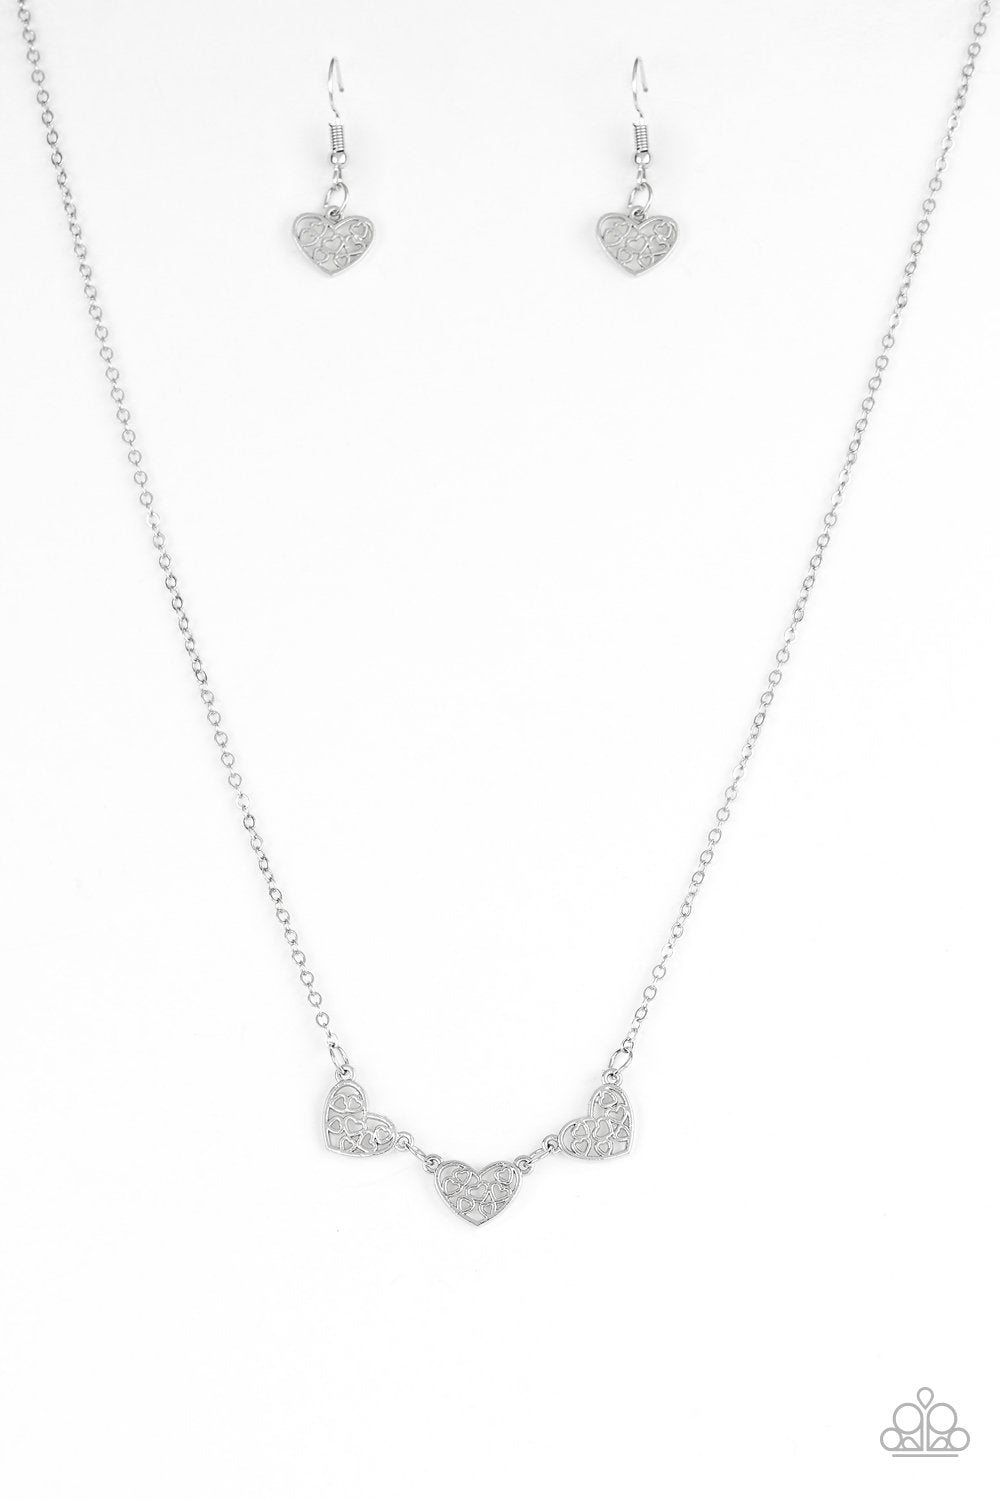 Paparazzi Necklace ~ Another Love Story - Silver